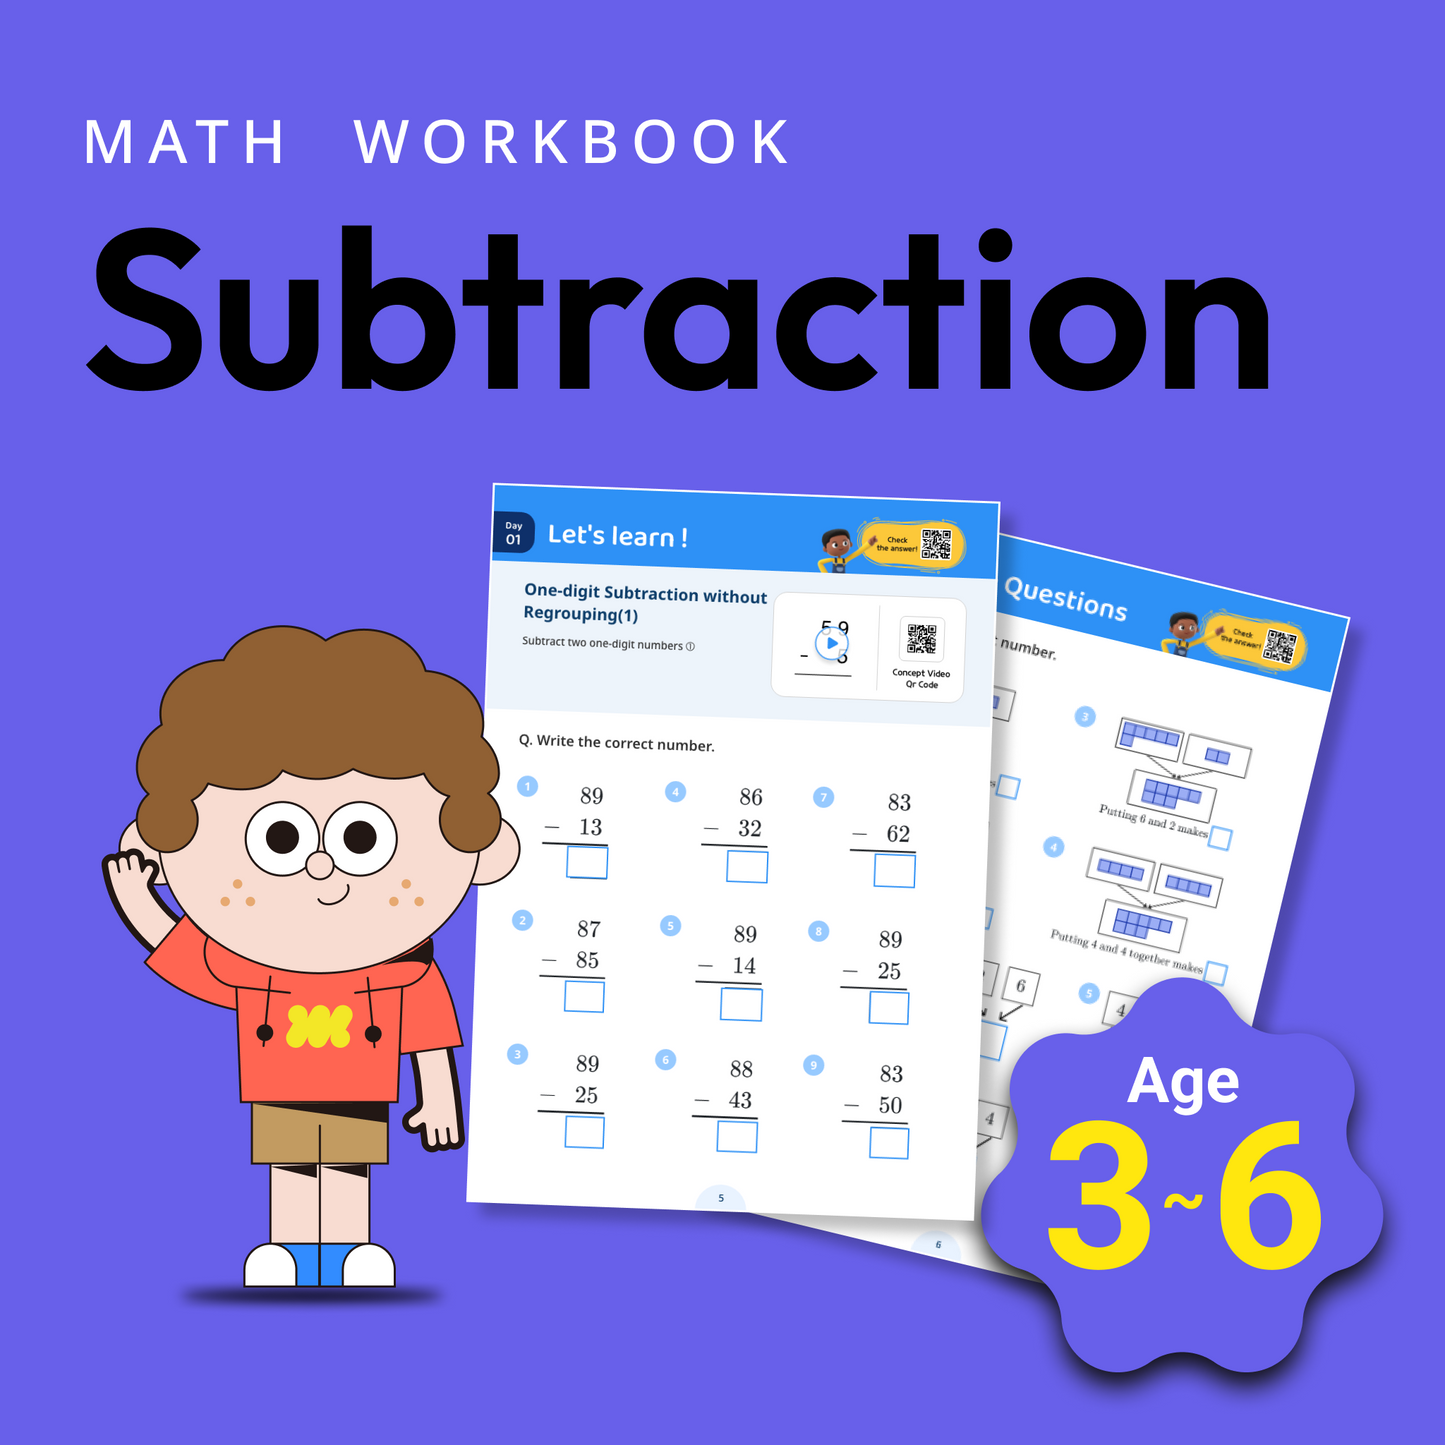 Subtract_two_three-digit_numbers_-_with_regrouping